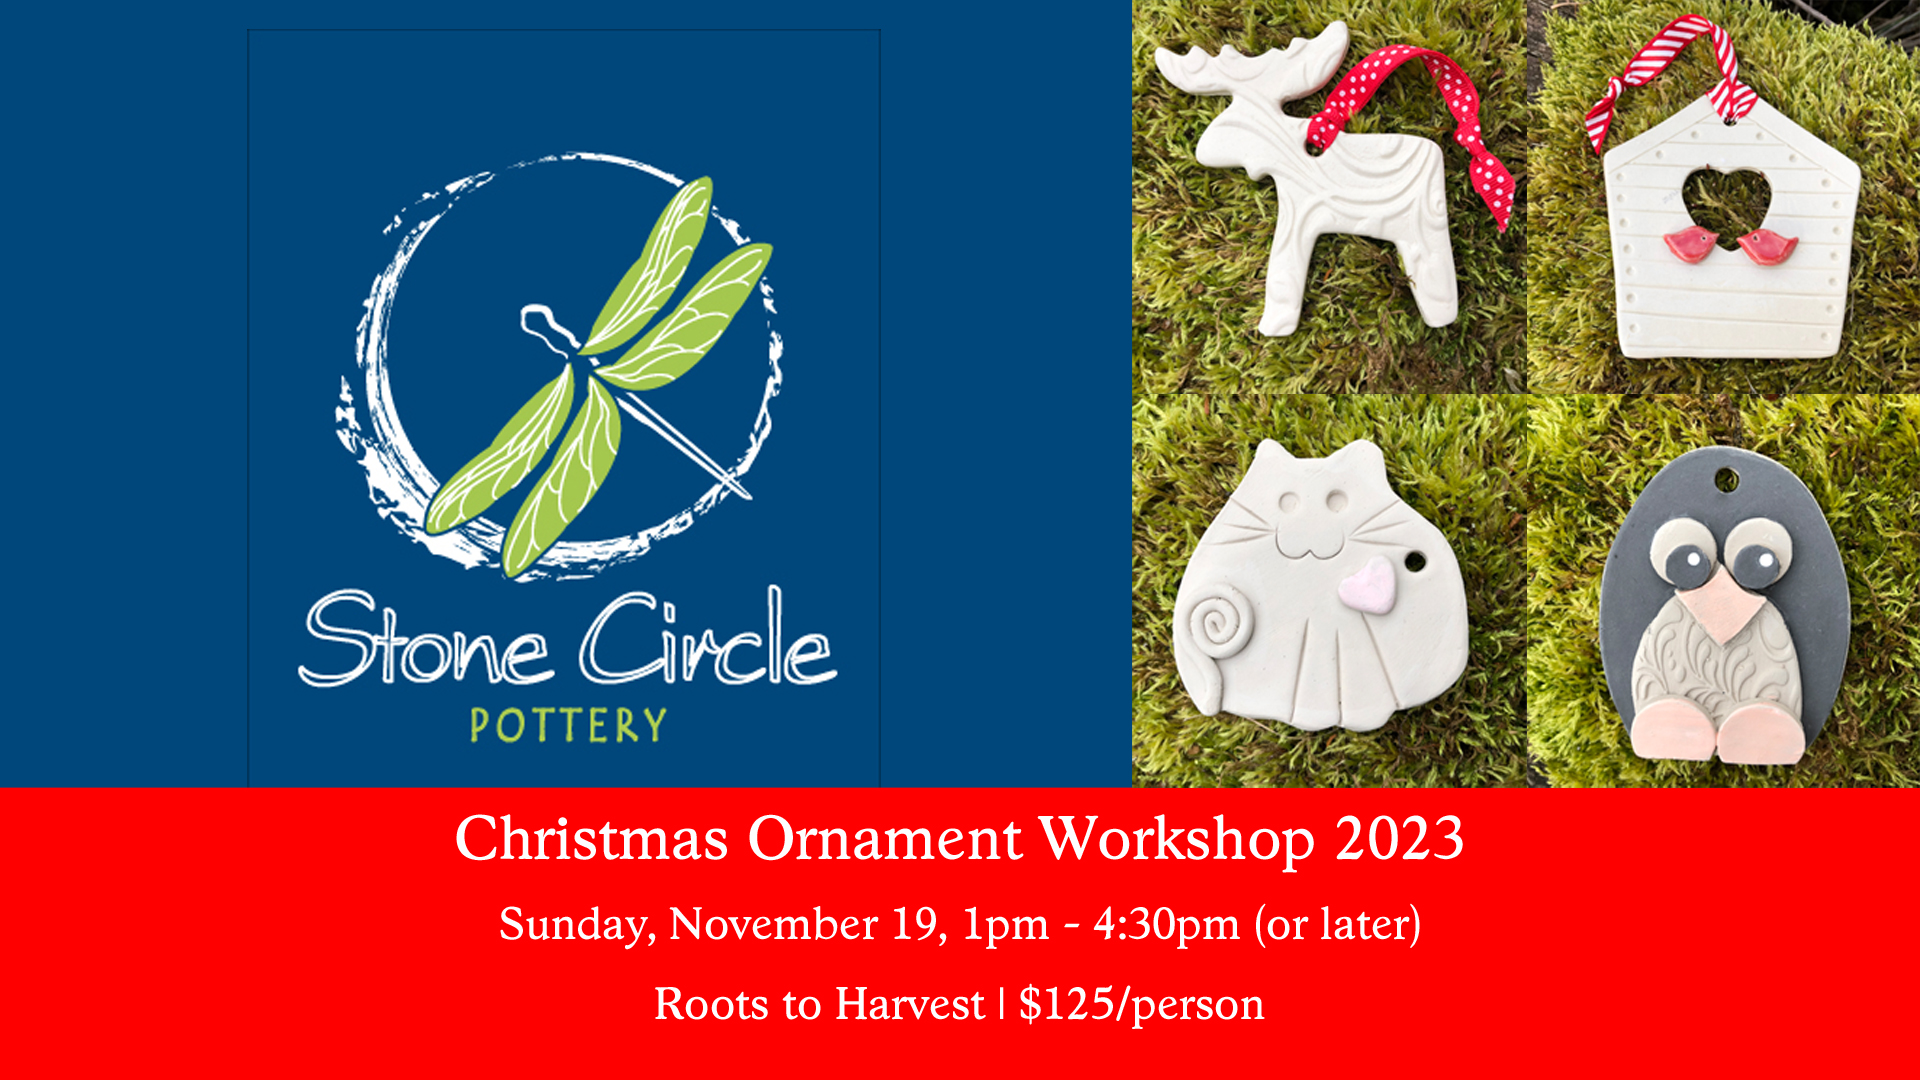 Stone Circle Pottery’s Christmas Ornament Workshop